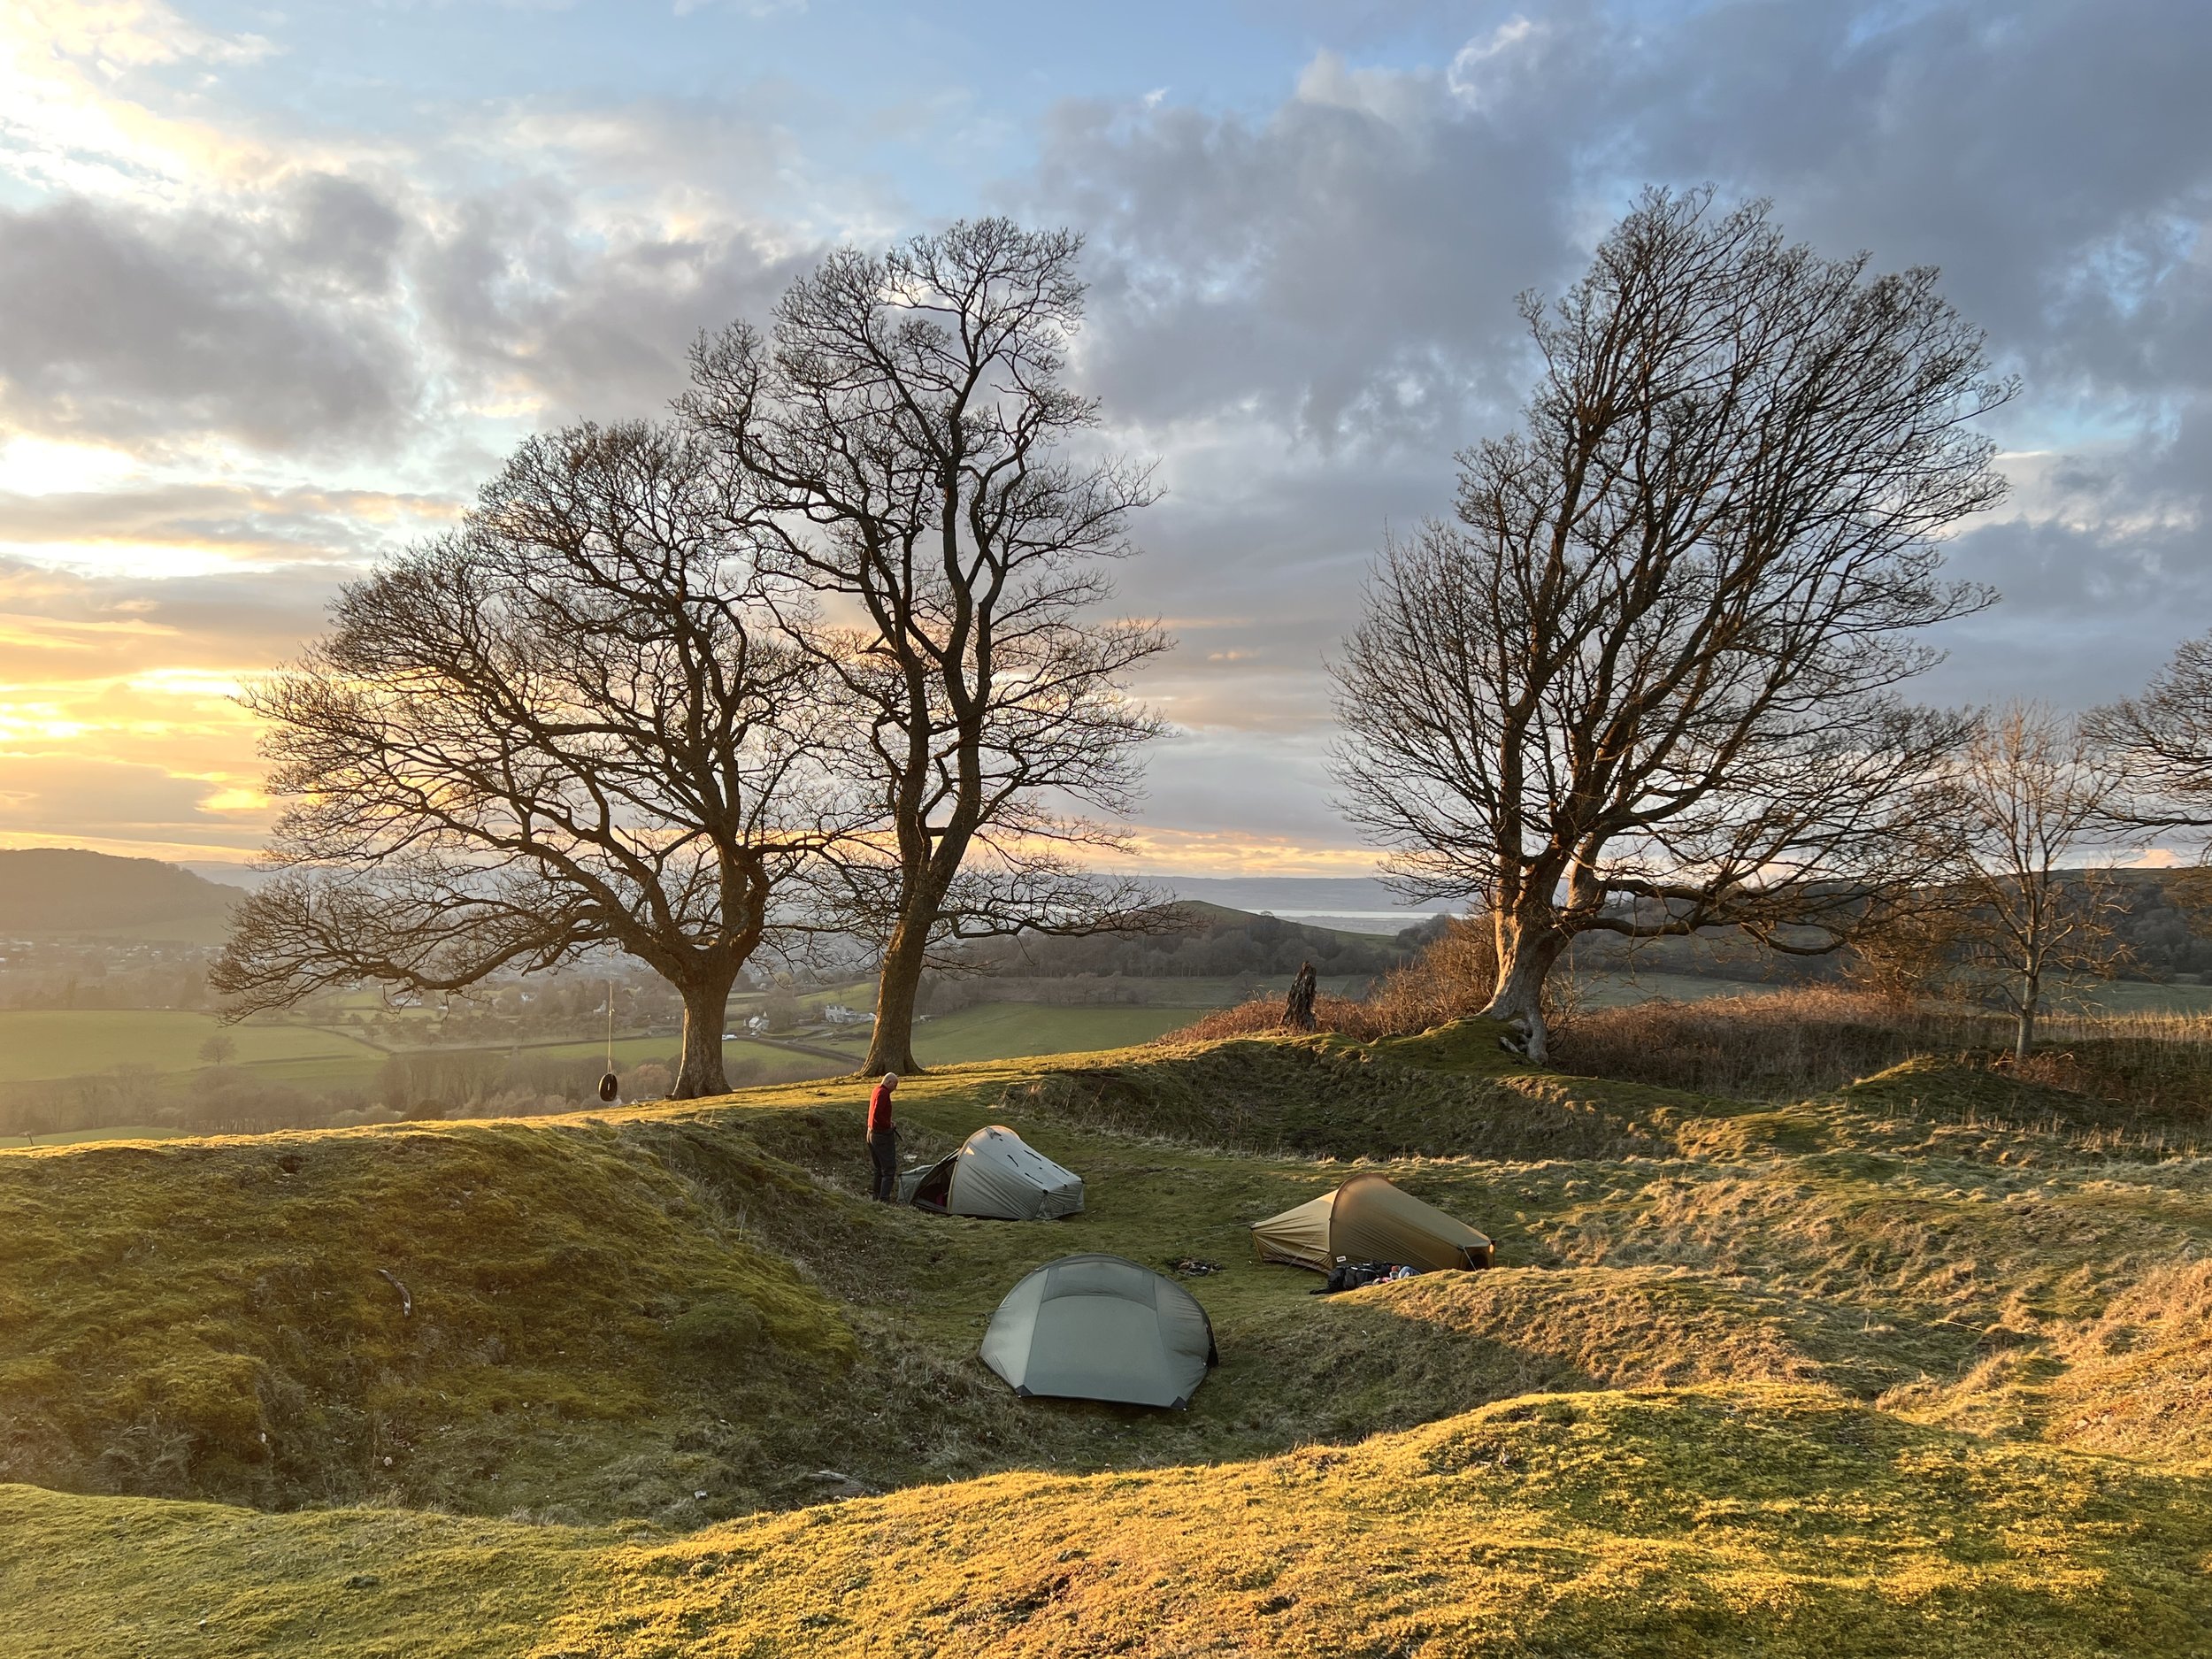 Wild-camping-cotswolds-cotswolds-way-wild-camping.jpg